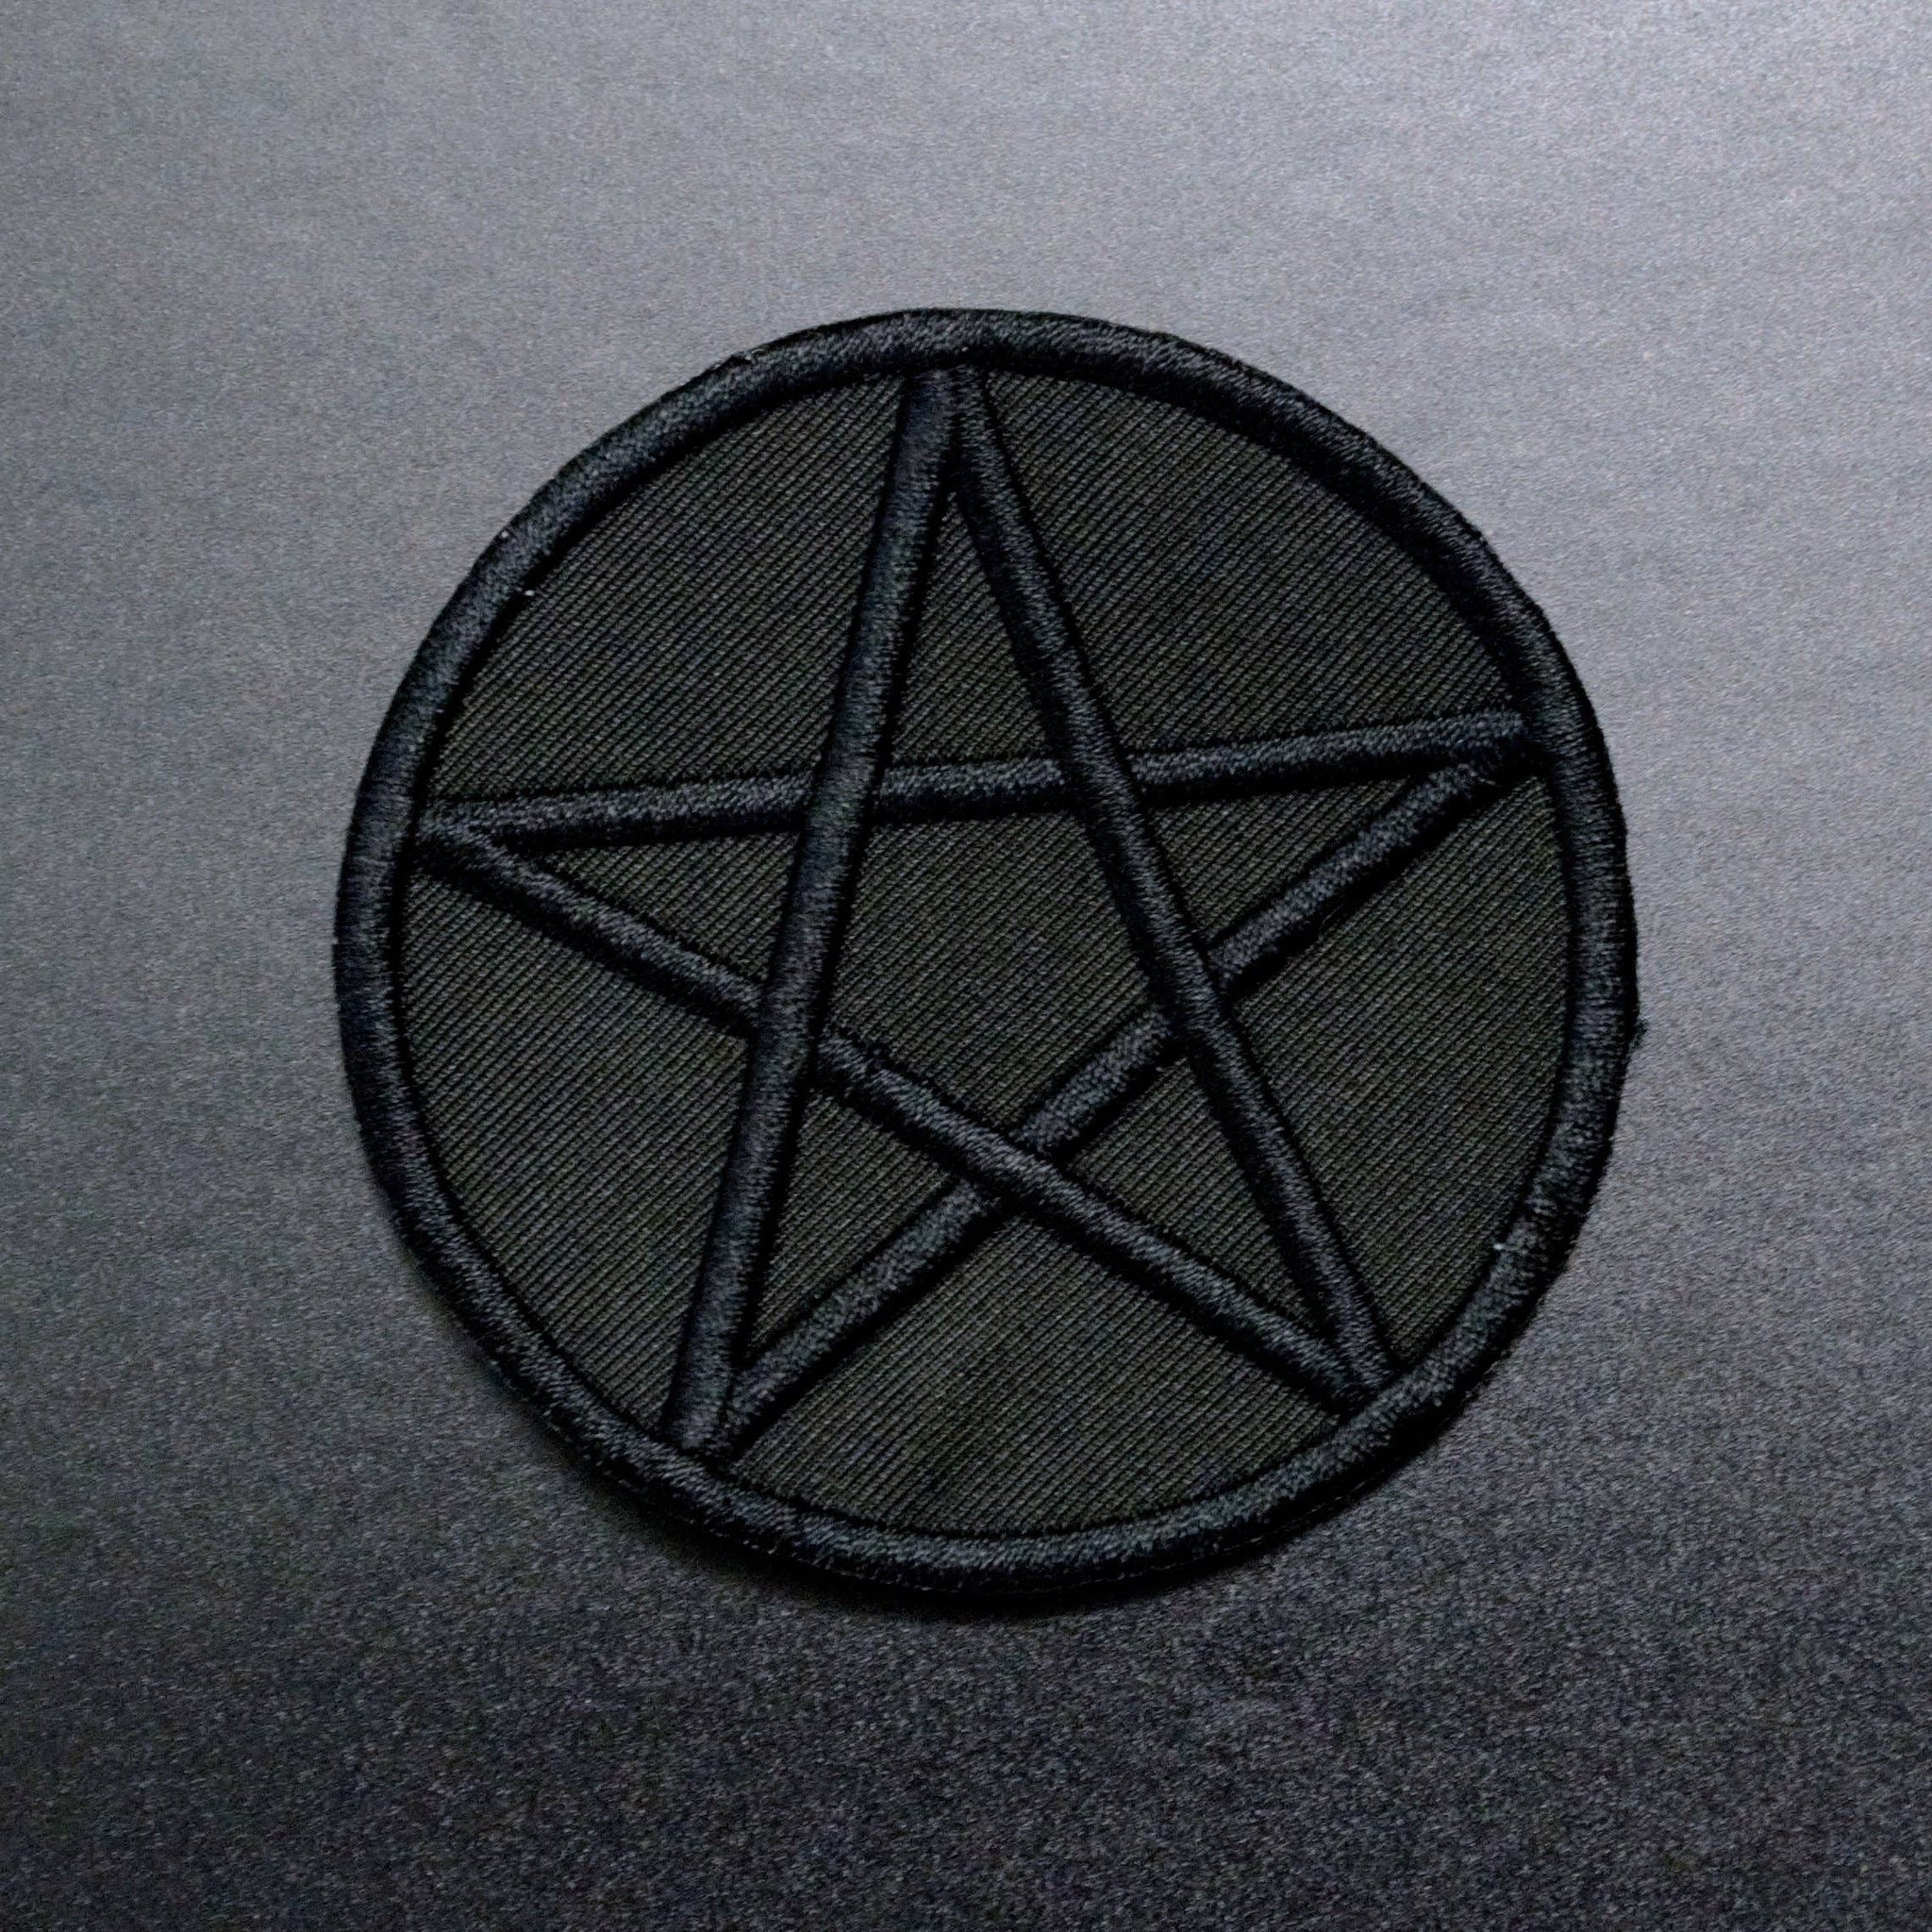 3" round black embroidery on black canvas Pentagram patch